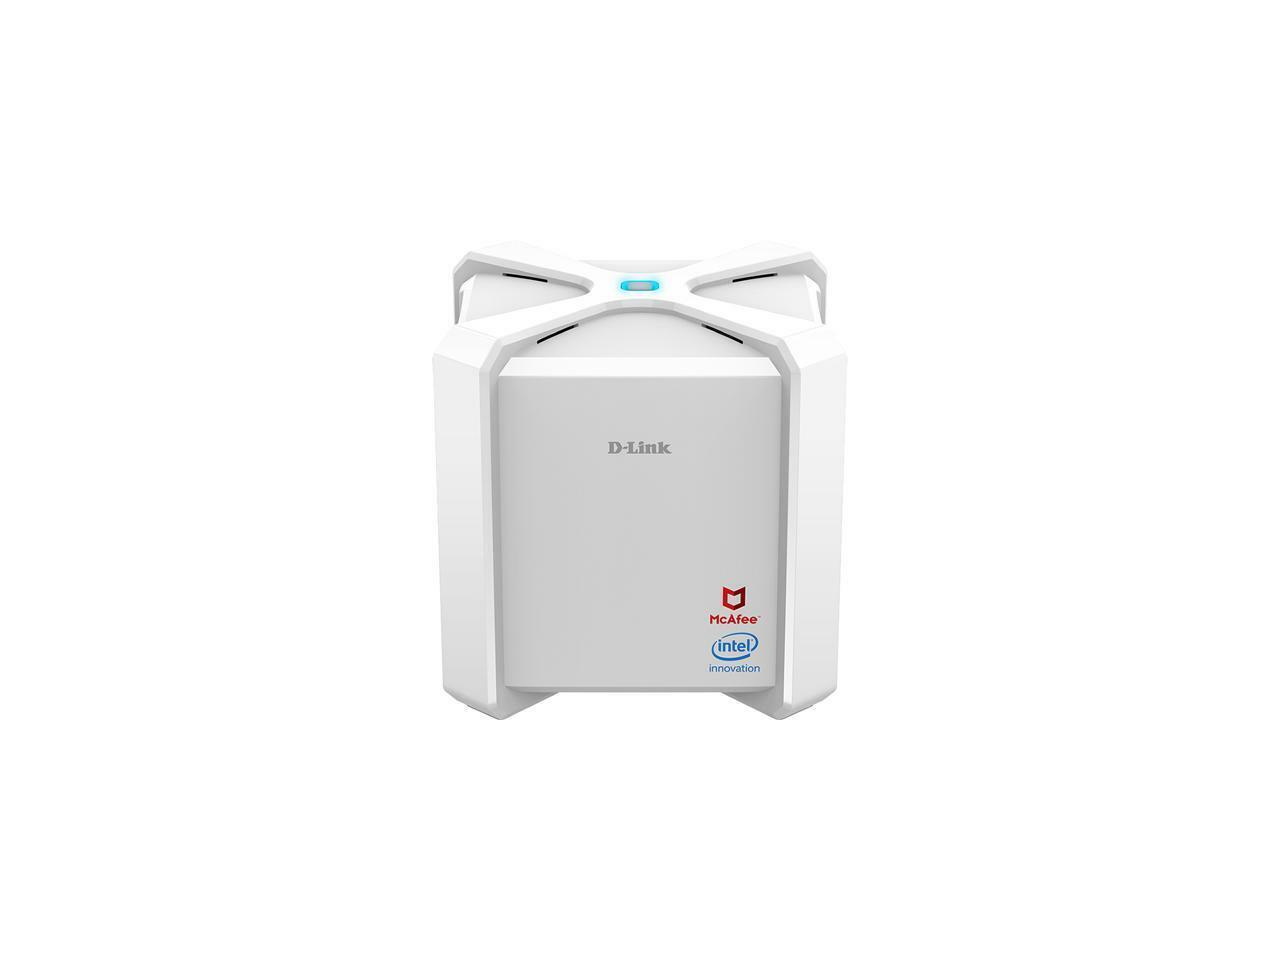 New D-Link WiFi Router AC2600 Dual Band MU-Mimo Works with Alexa & McAfee D-Fend